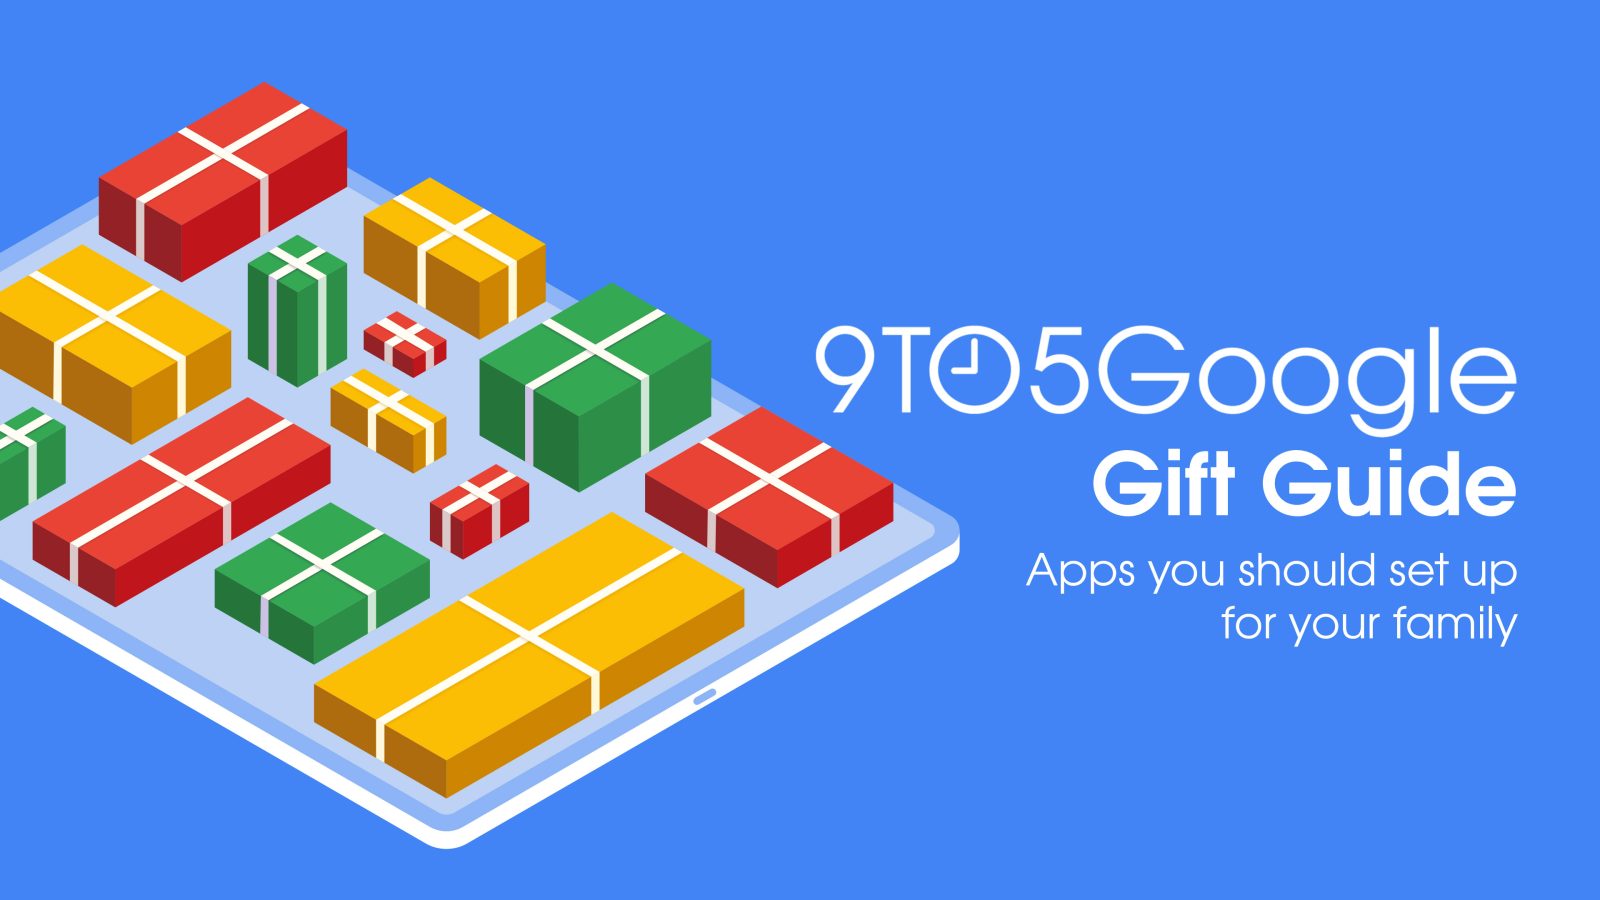 gift guide apps services family tech